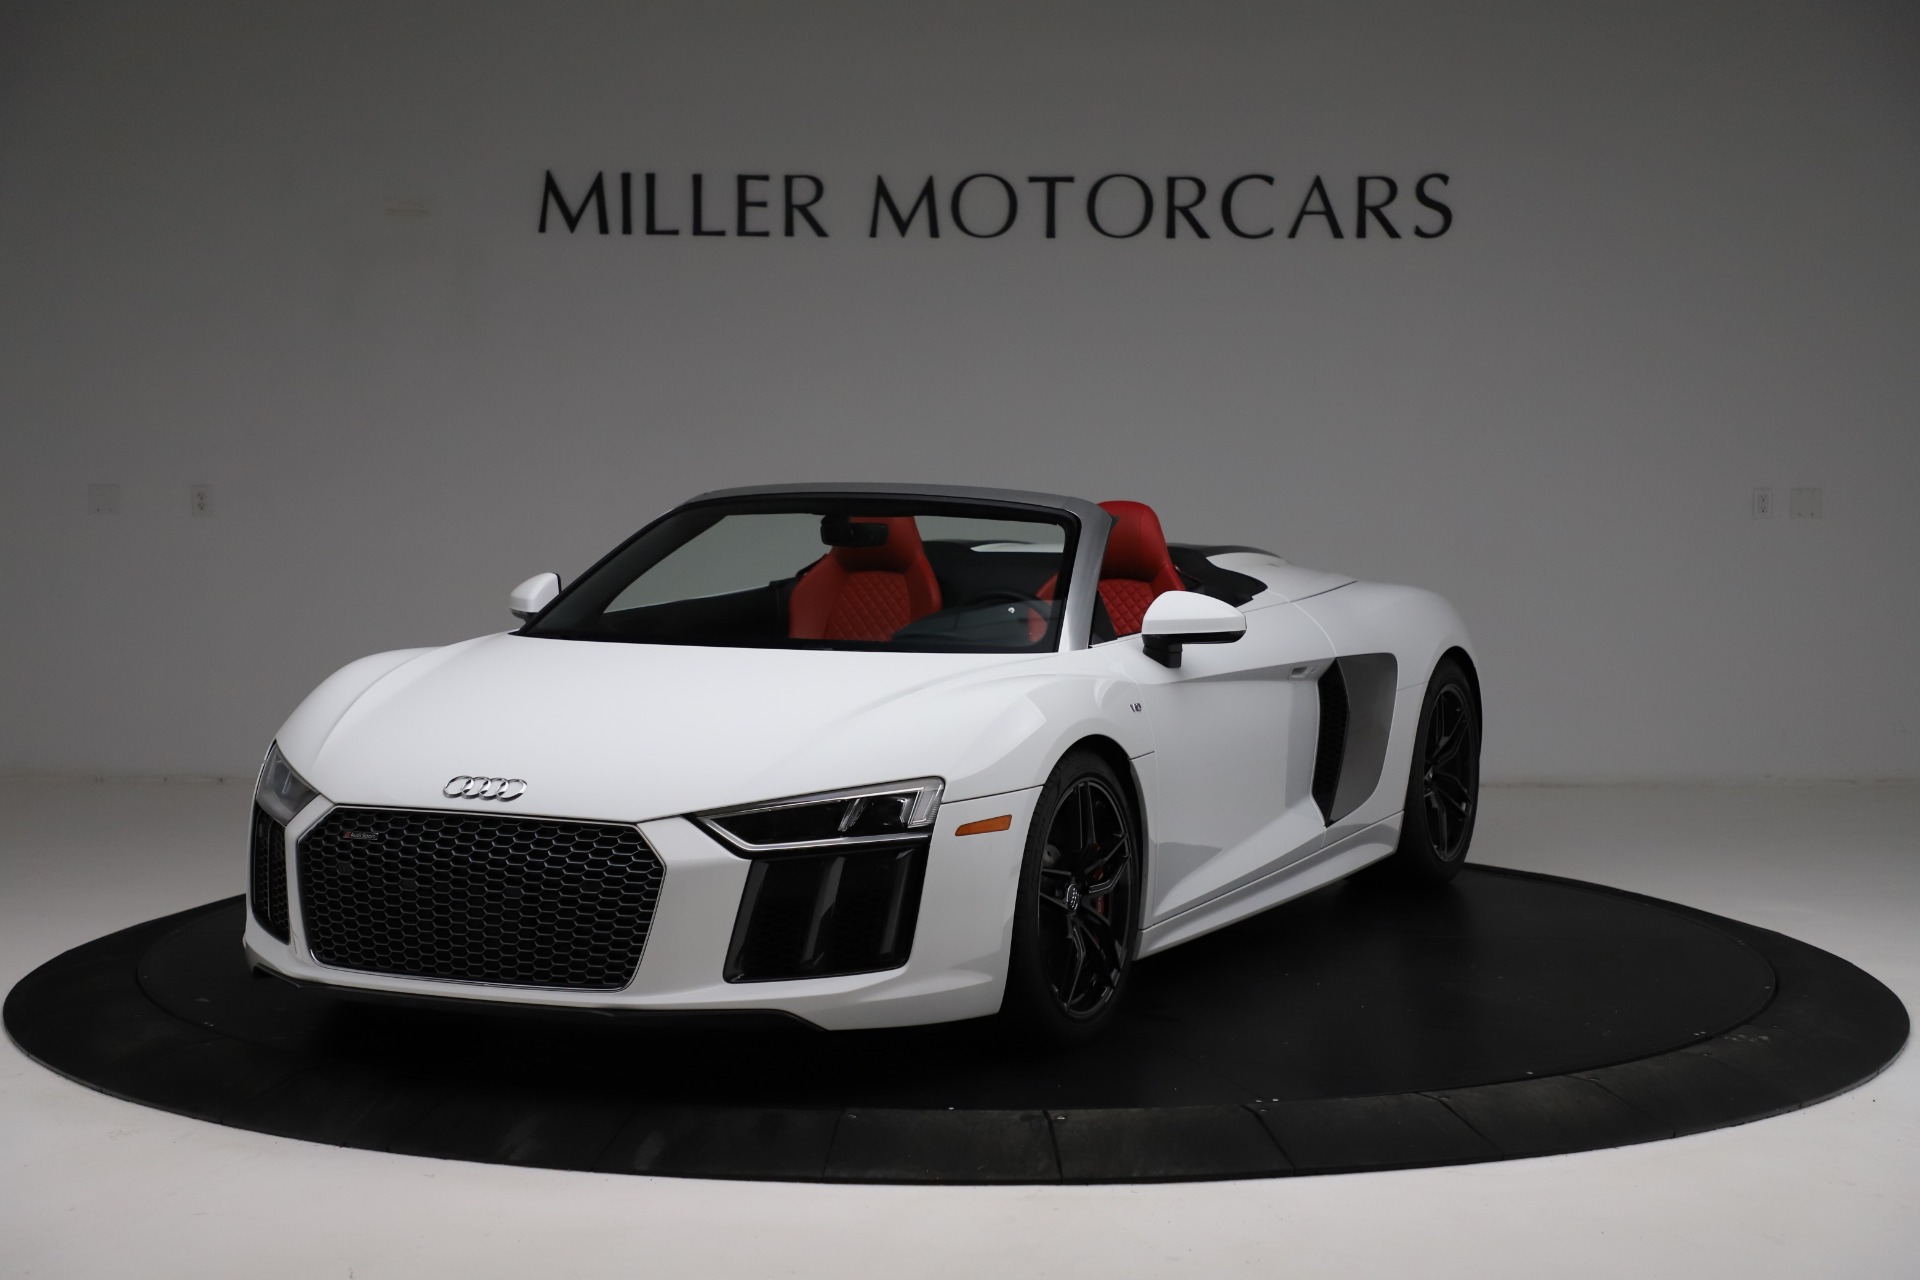 Used 2018 Audi R8 Spyder for sale Sold at McLaren Greenwich in Greenwich CT 06830 1